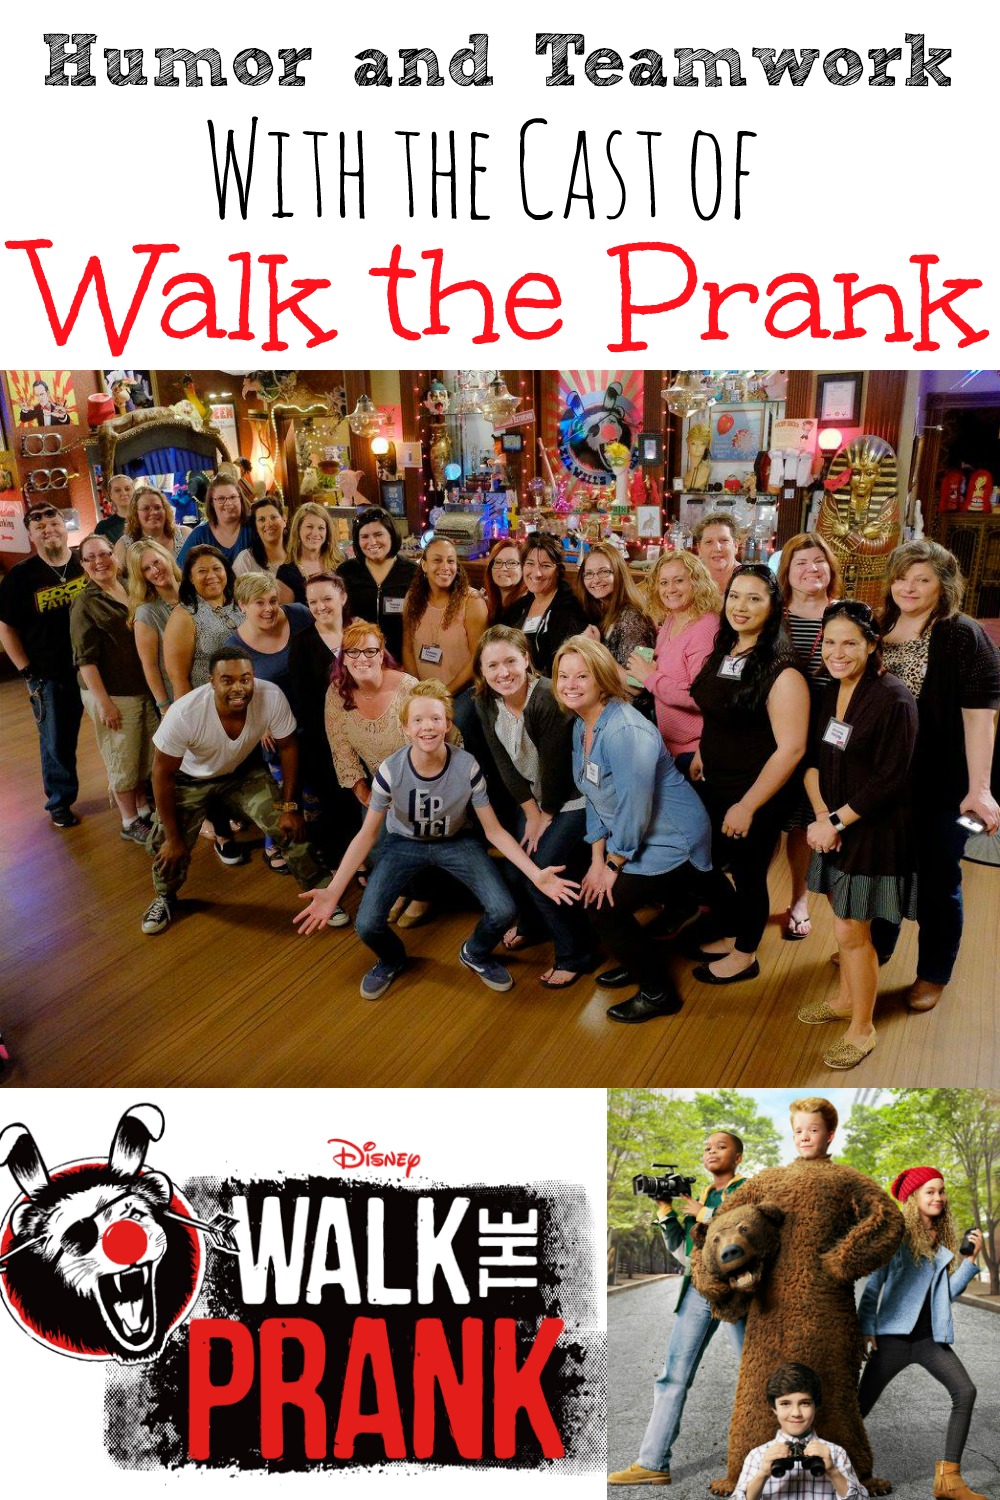 Humor and Teamwork With the Cast of Walk the Prank